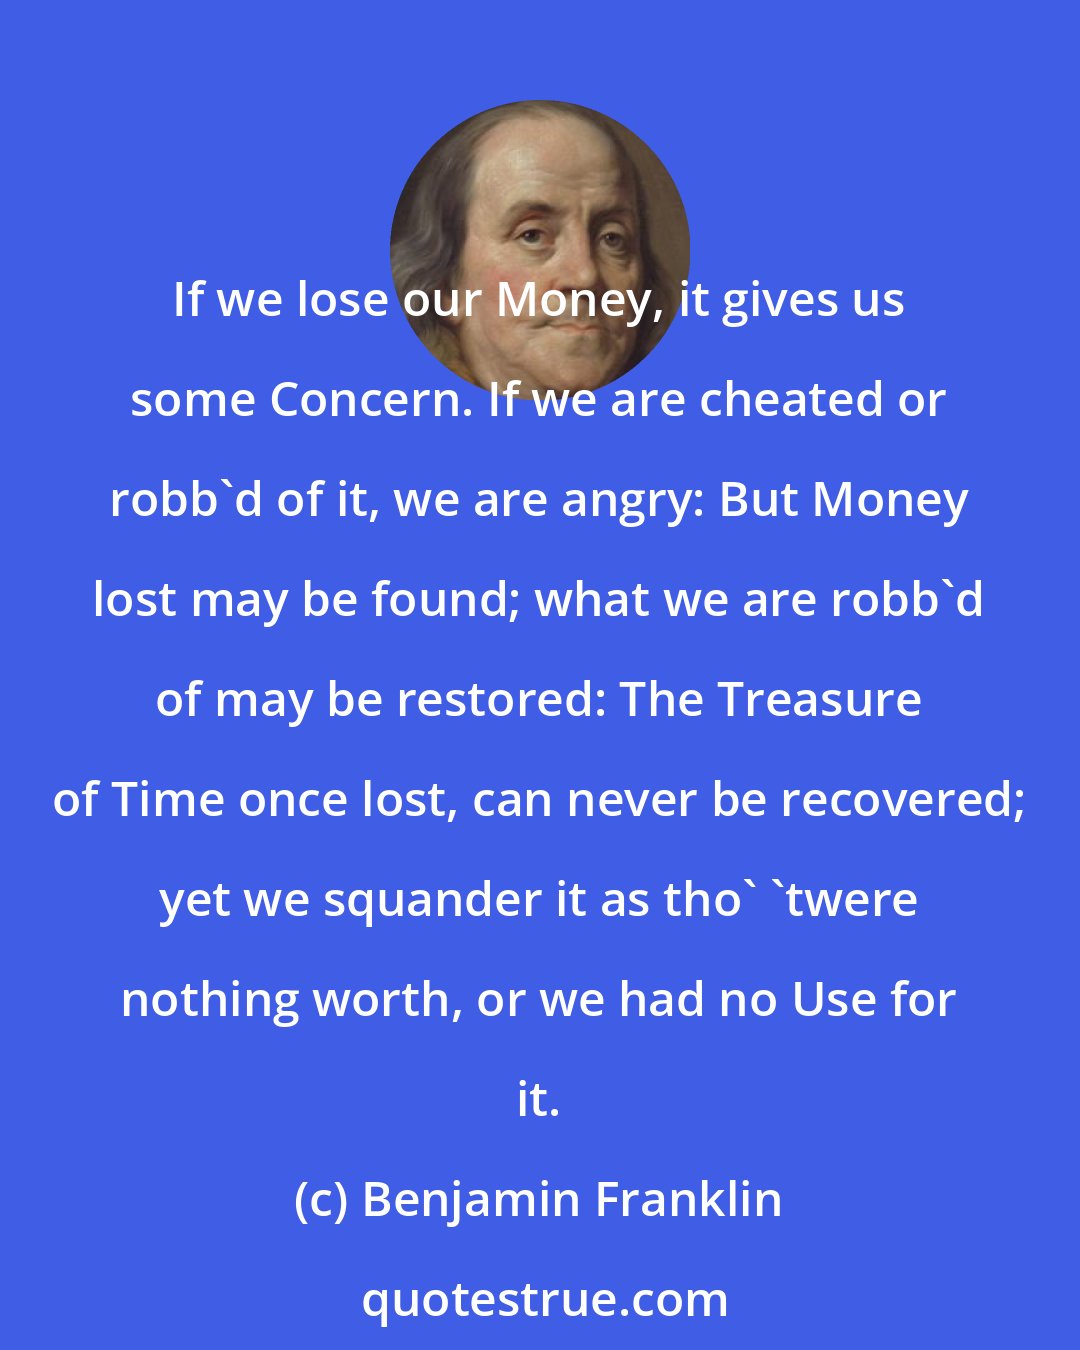 Benjamin Franklin: If we lose our Money, it gives us some Concern. If we are cheated or robb'd of it, we are angry: But Money lost may be found; what we are robb'd of may be restored: The Treasure of Time once lost, can never be recovered; yet we squander it as tho' 'twere nothing worth, or we had no Use for it.